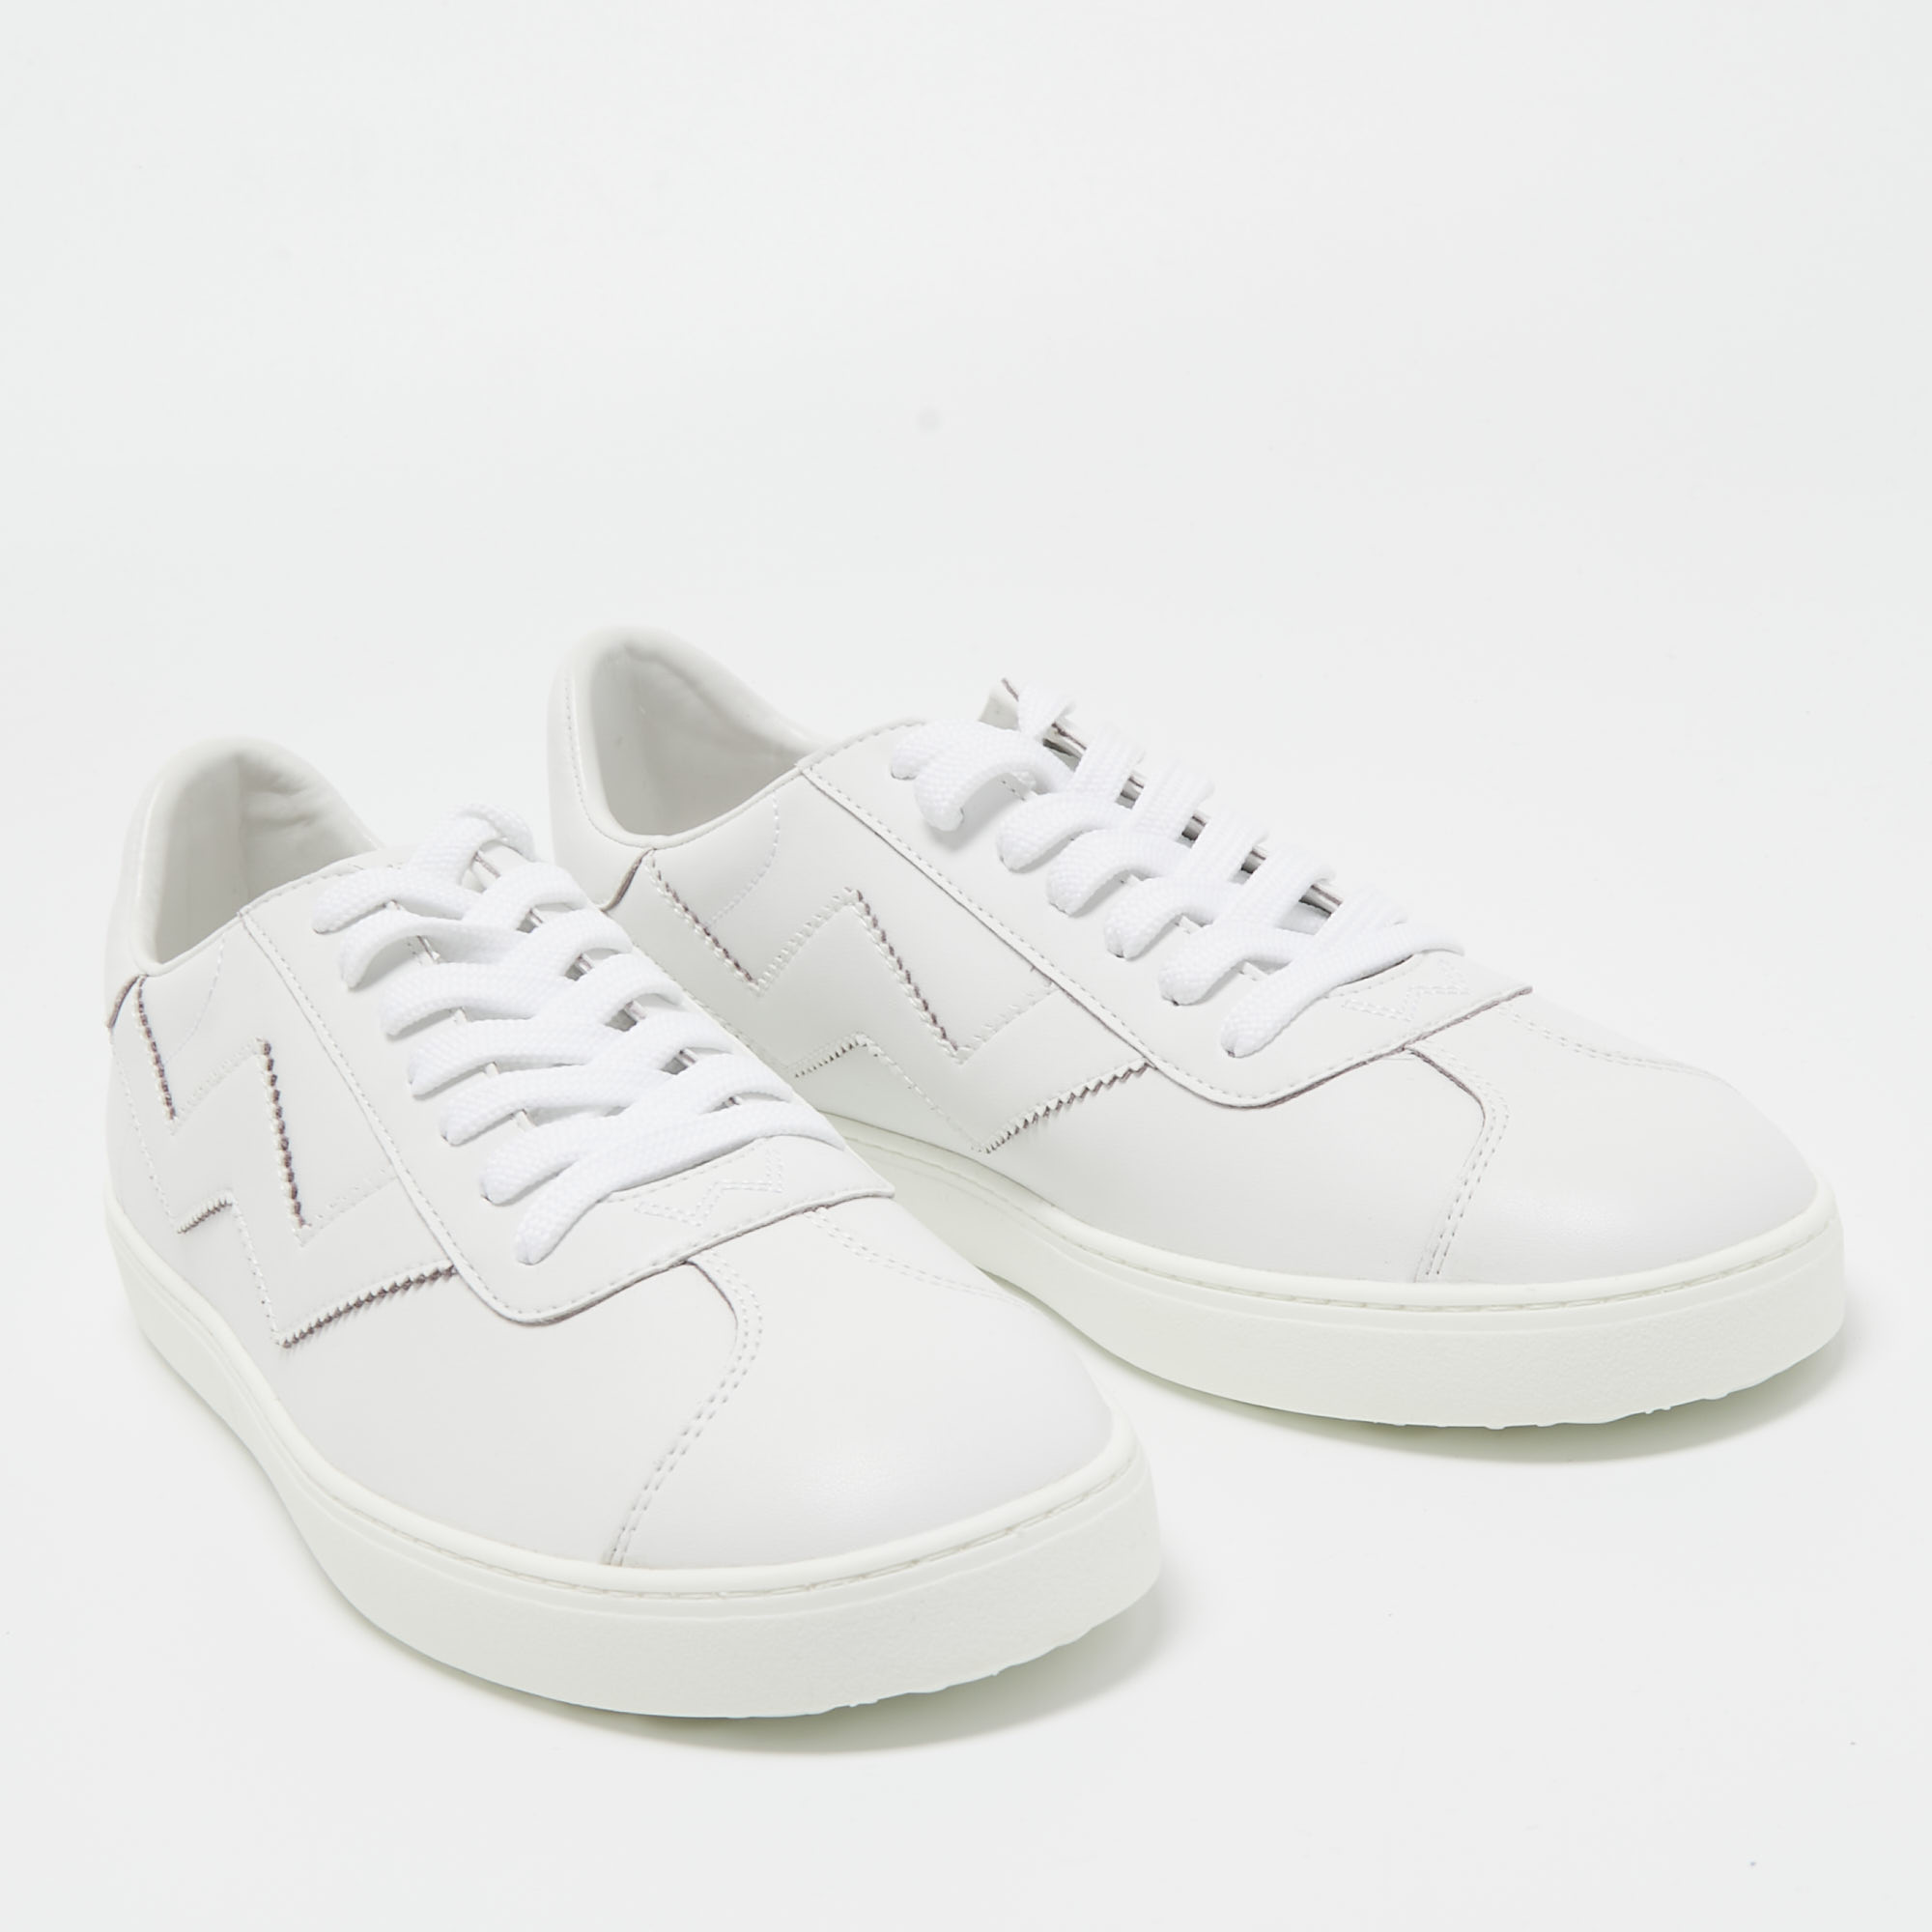 Stuart Weitzman White Leather Daryl Low Top Sneakers Size 42